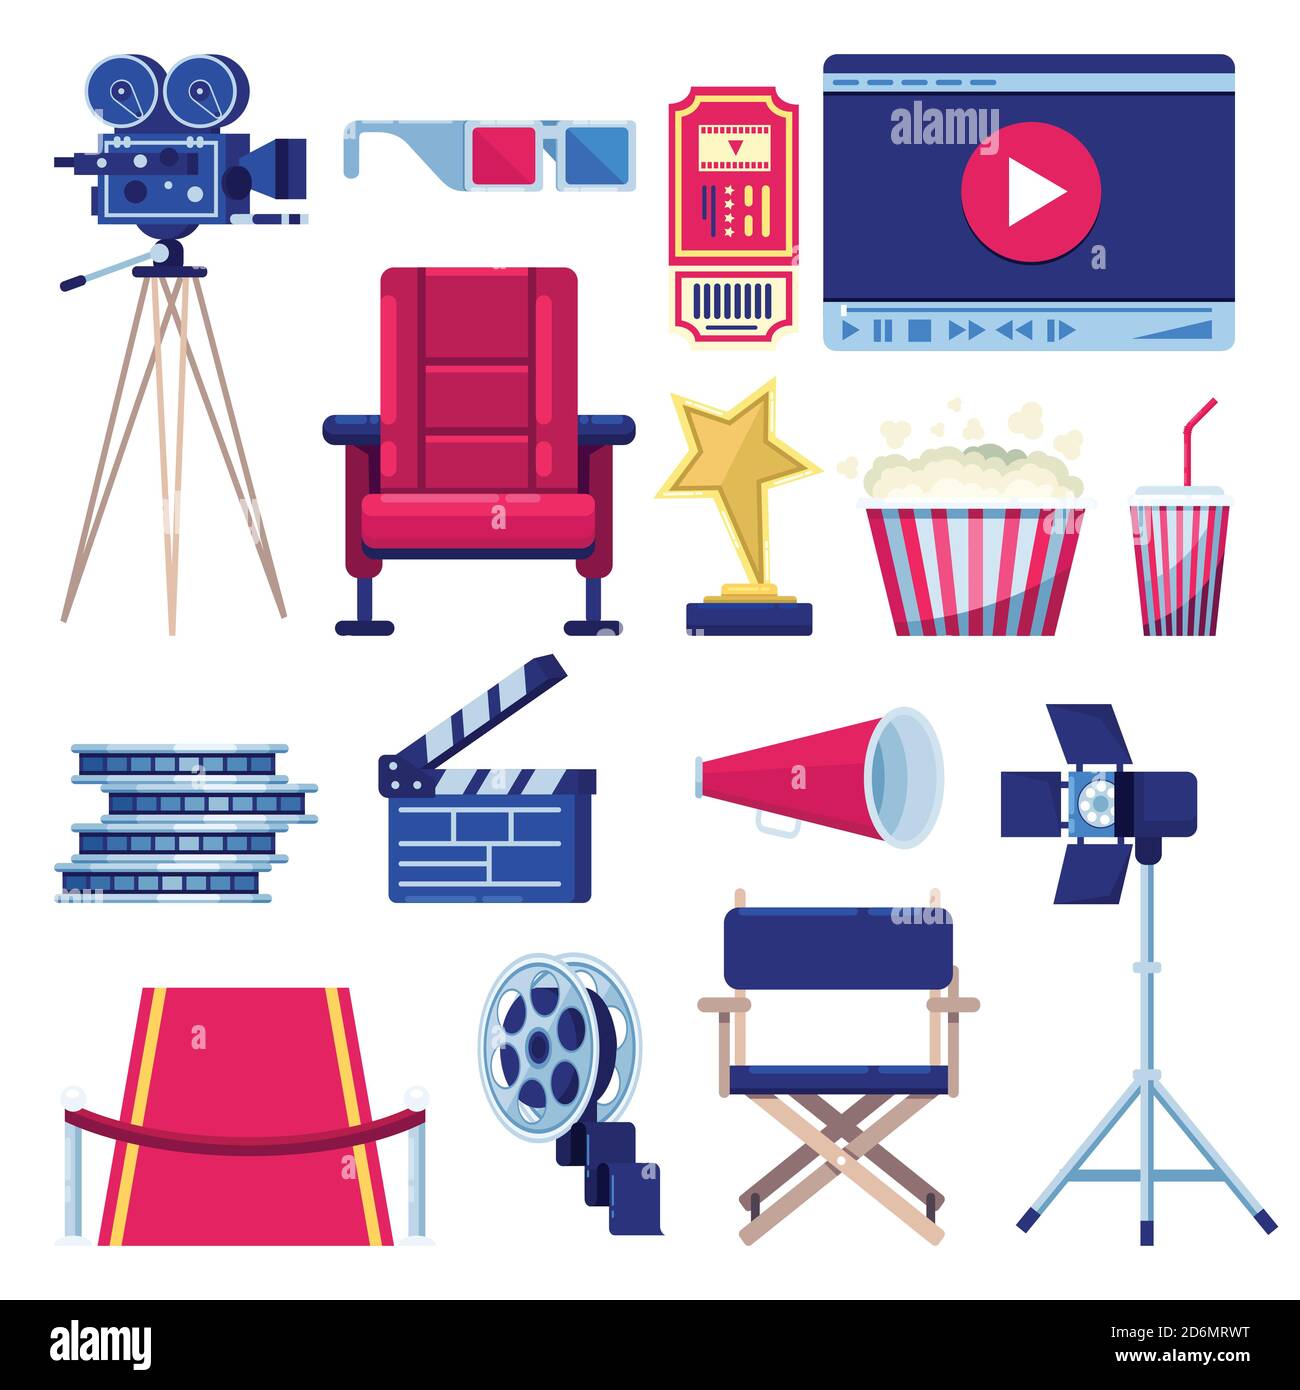 Movie and cinema theater vector flat icons set. Video and film production design elements. Multimedia maker equipment isolated on white background. Stock Vector